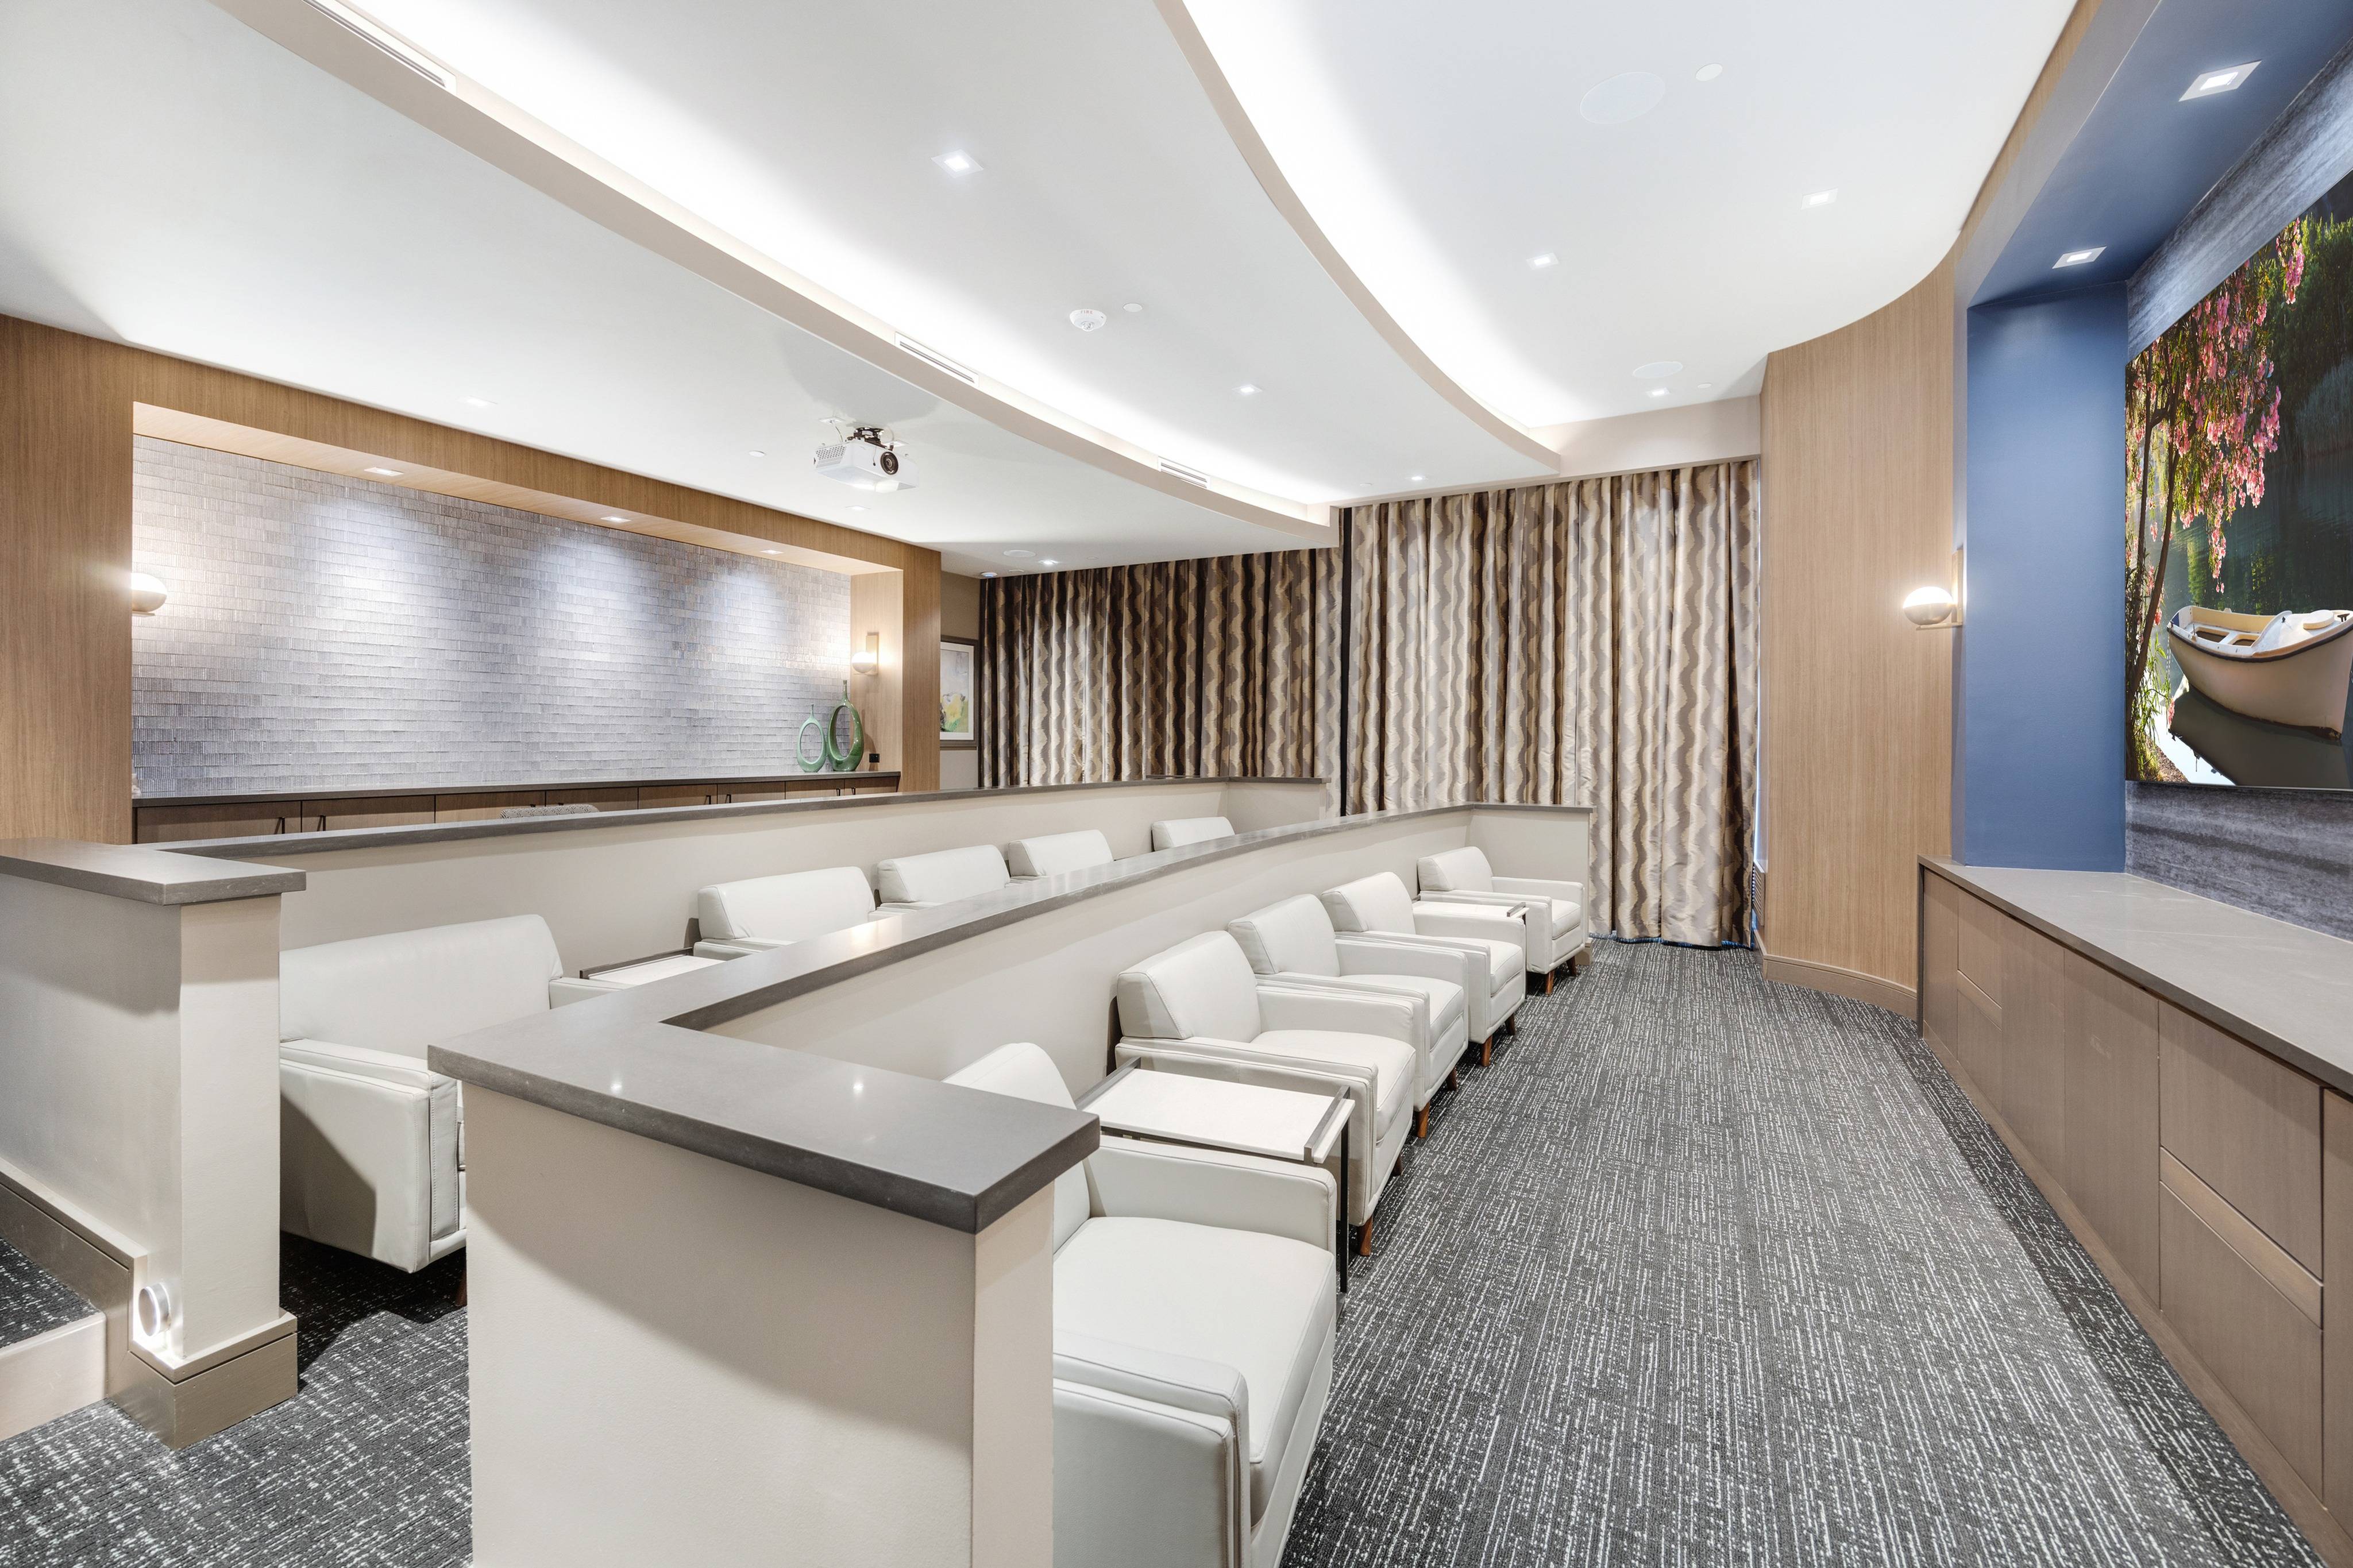 Media Room with Cinema-Style Seating